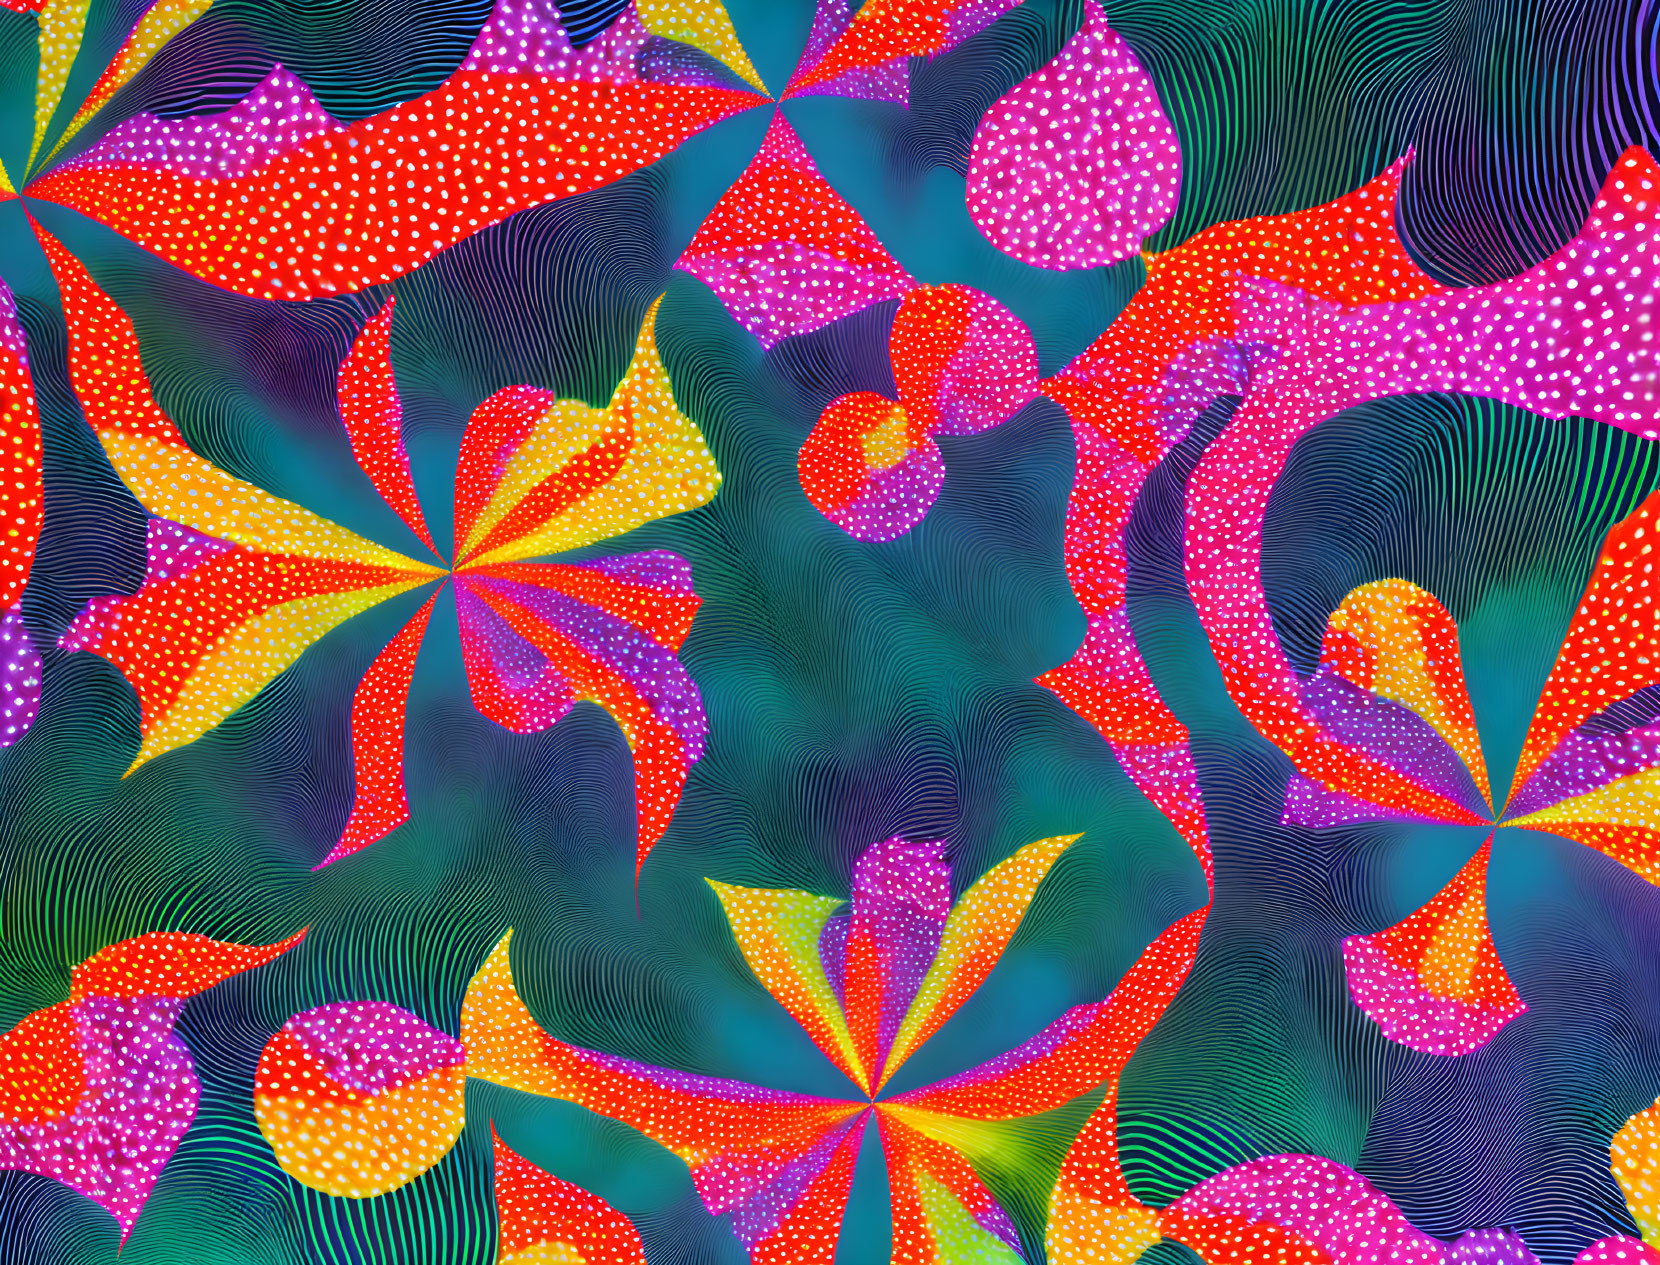 Abstract Psychedelic Pattern with Colorful Leaves and Floral Shapes on Blue Background